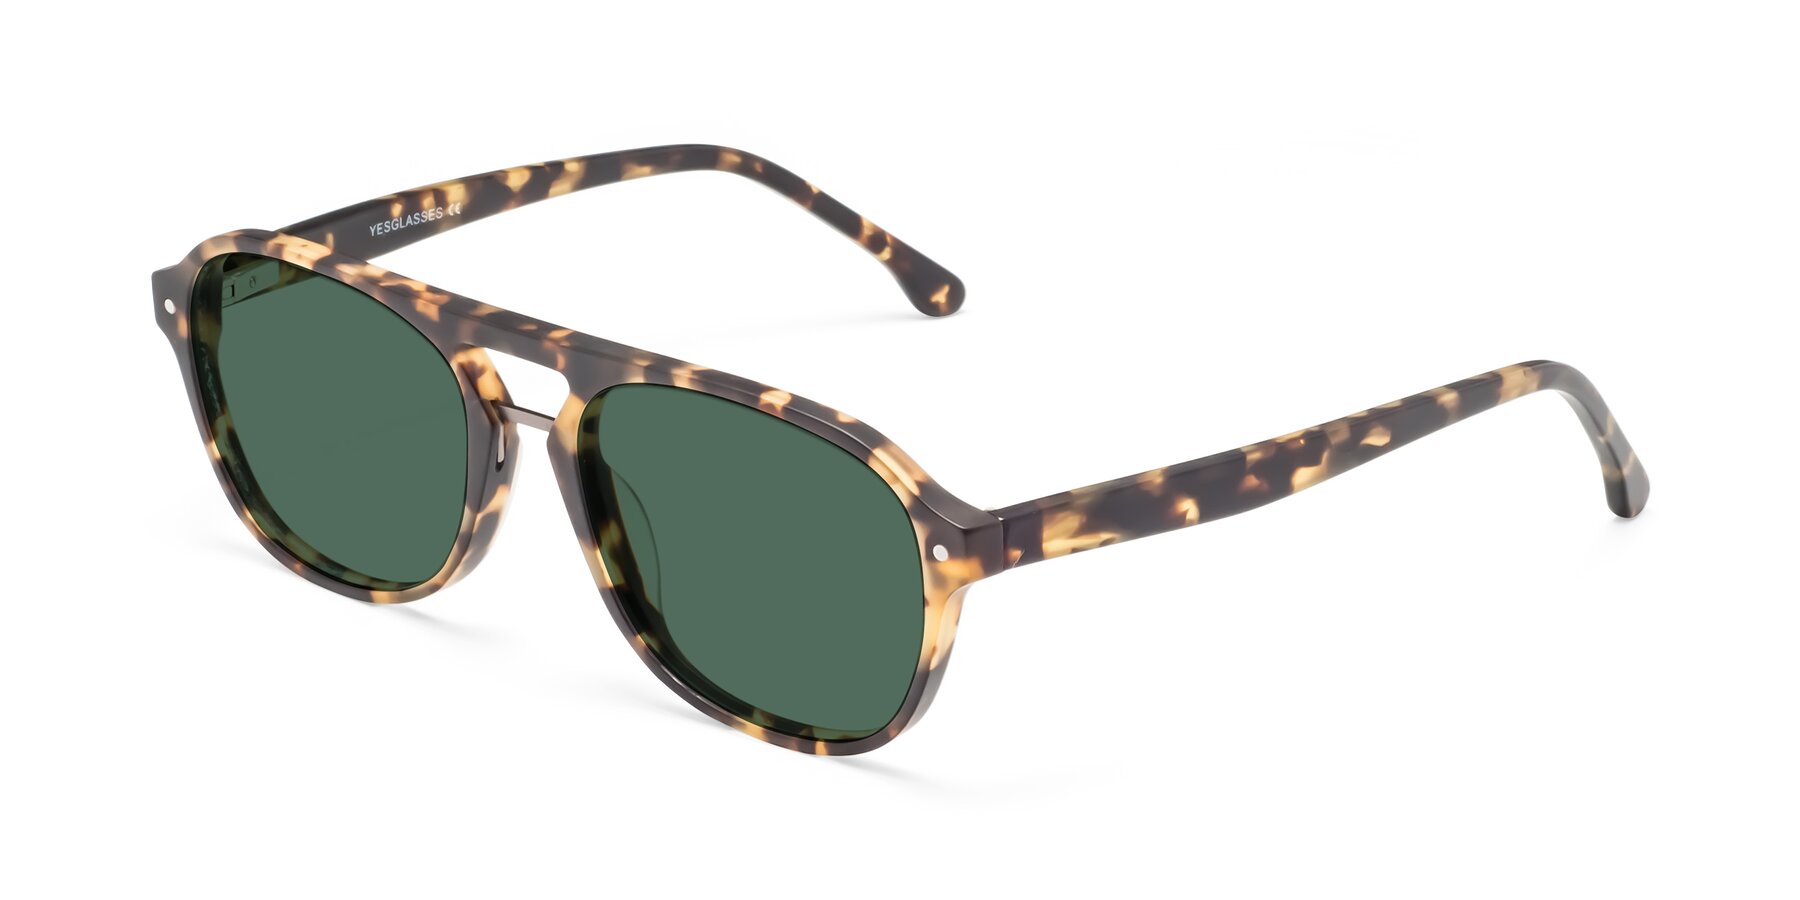 Angle of 17416 in Matte Tortoise with Green Polarized Lenses